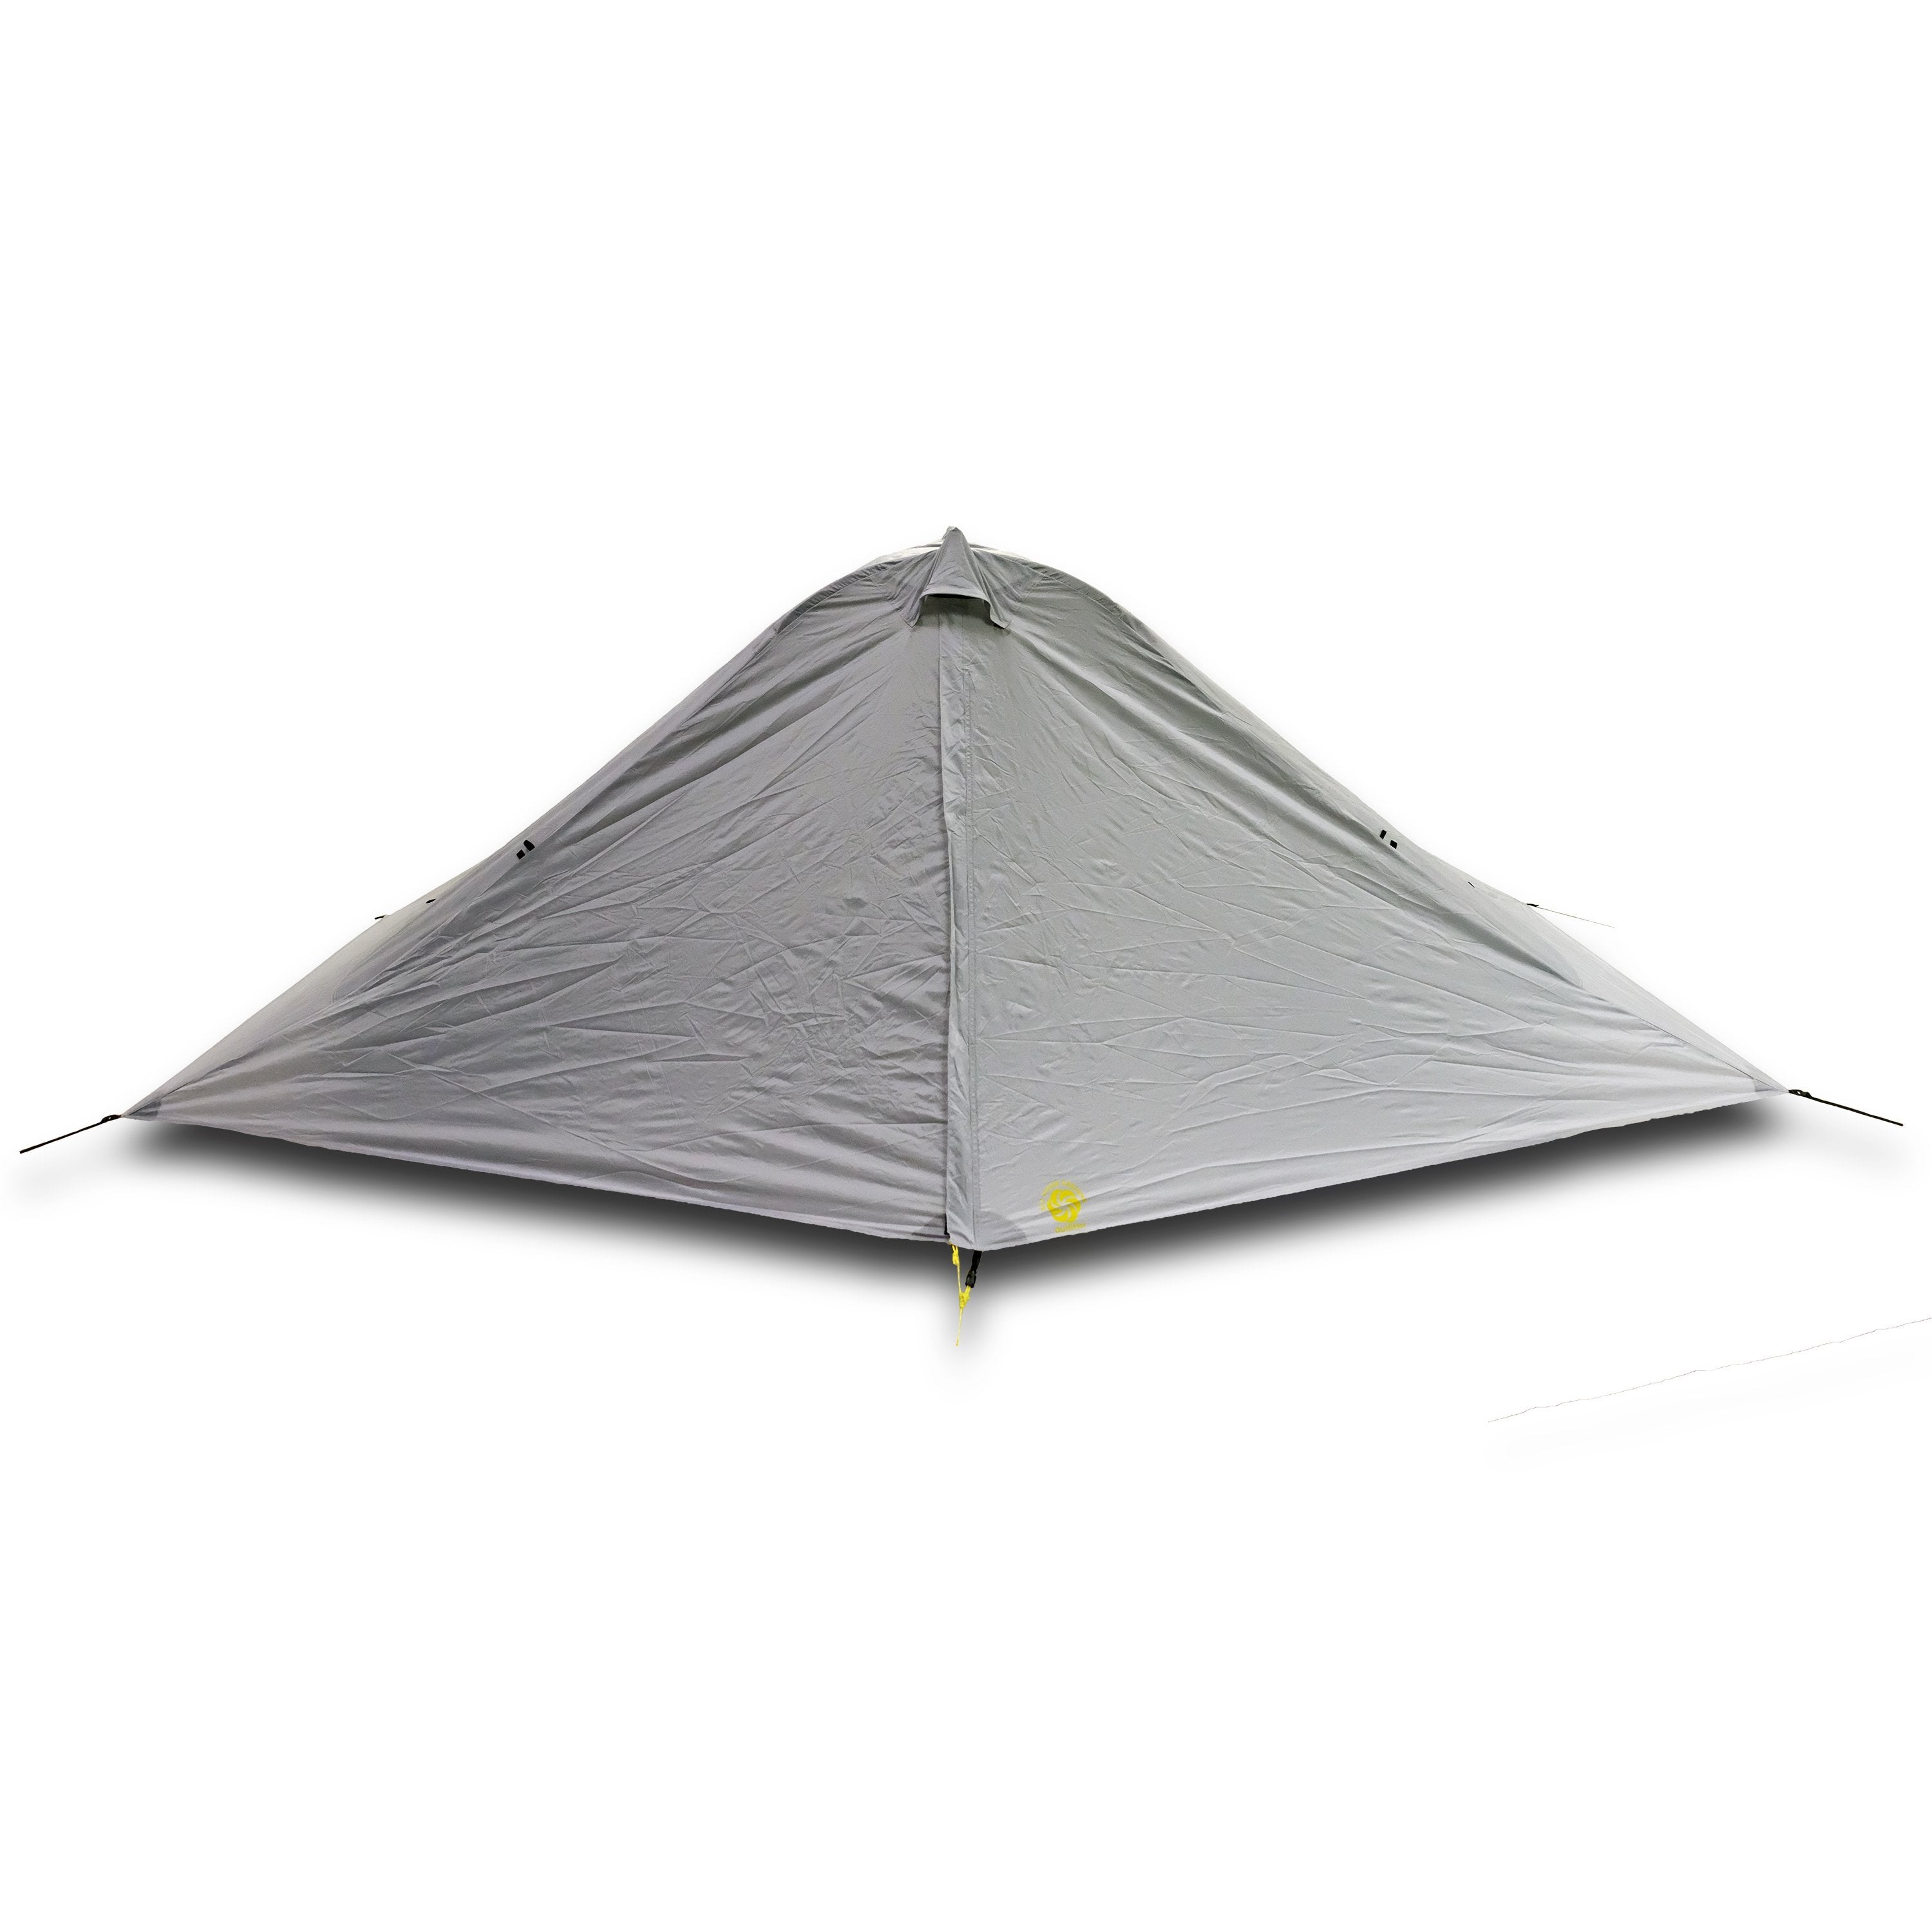 Lunar Duo Outfitter 2 Person Ultralight Tent with doors closed